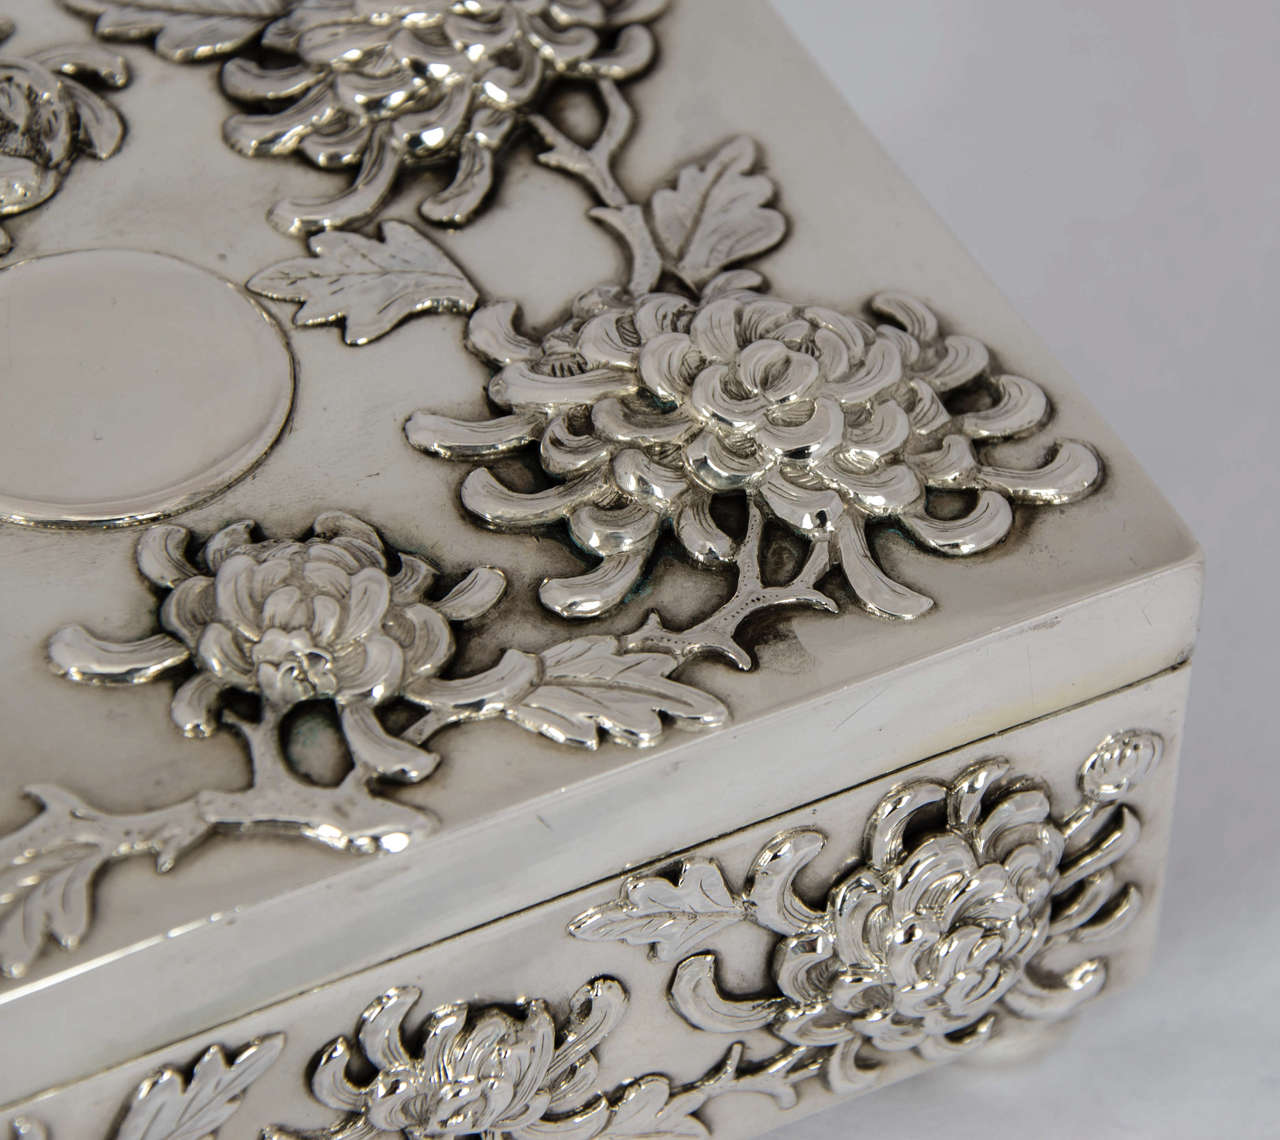 19th Century Chinese Export Silver Box with Chrysanthemum